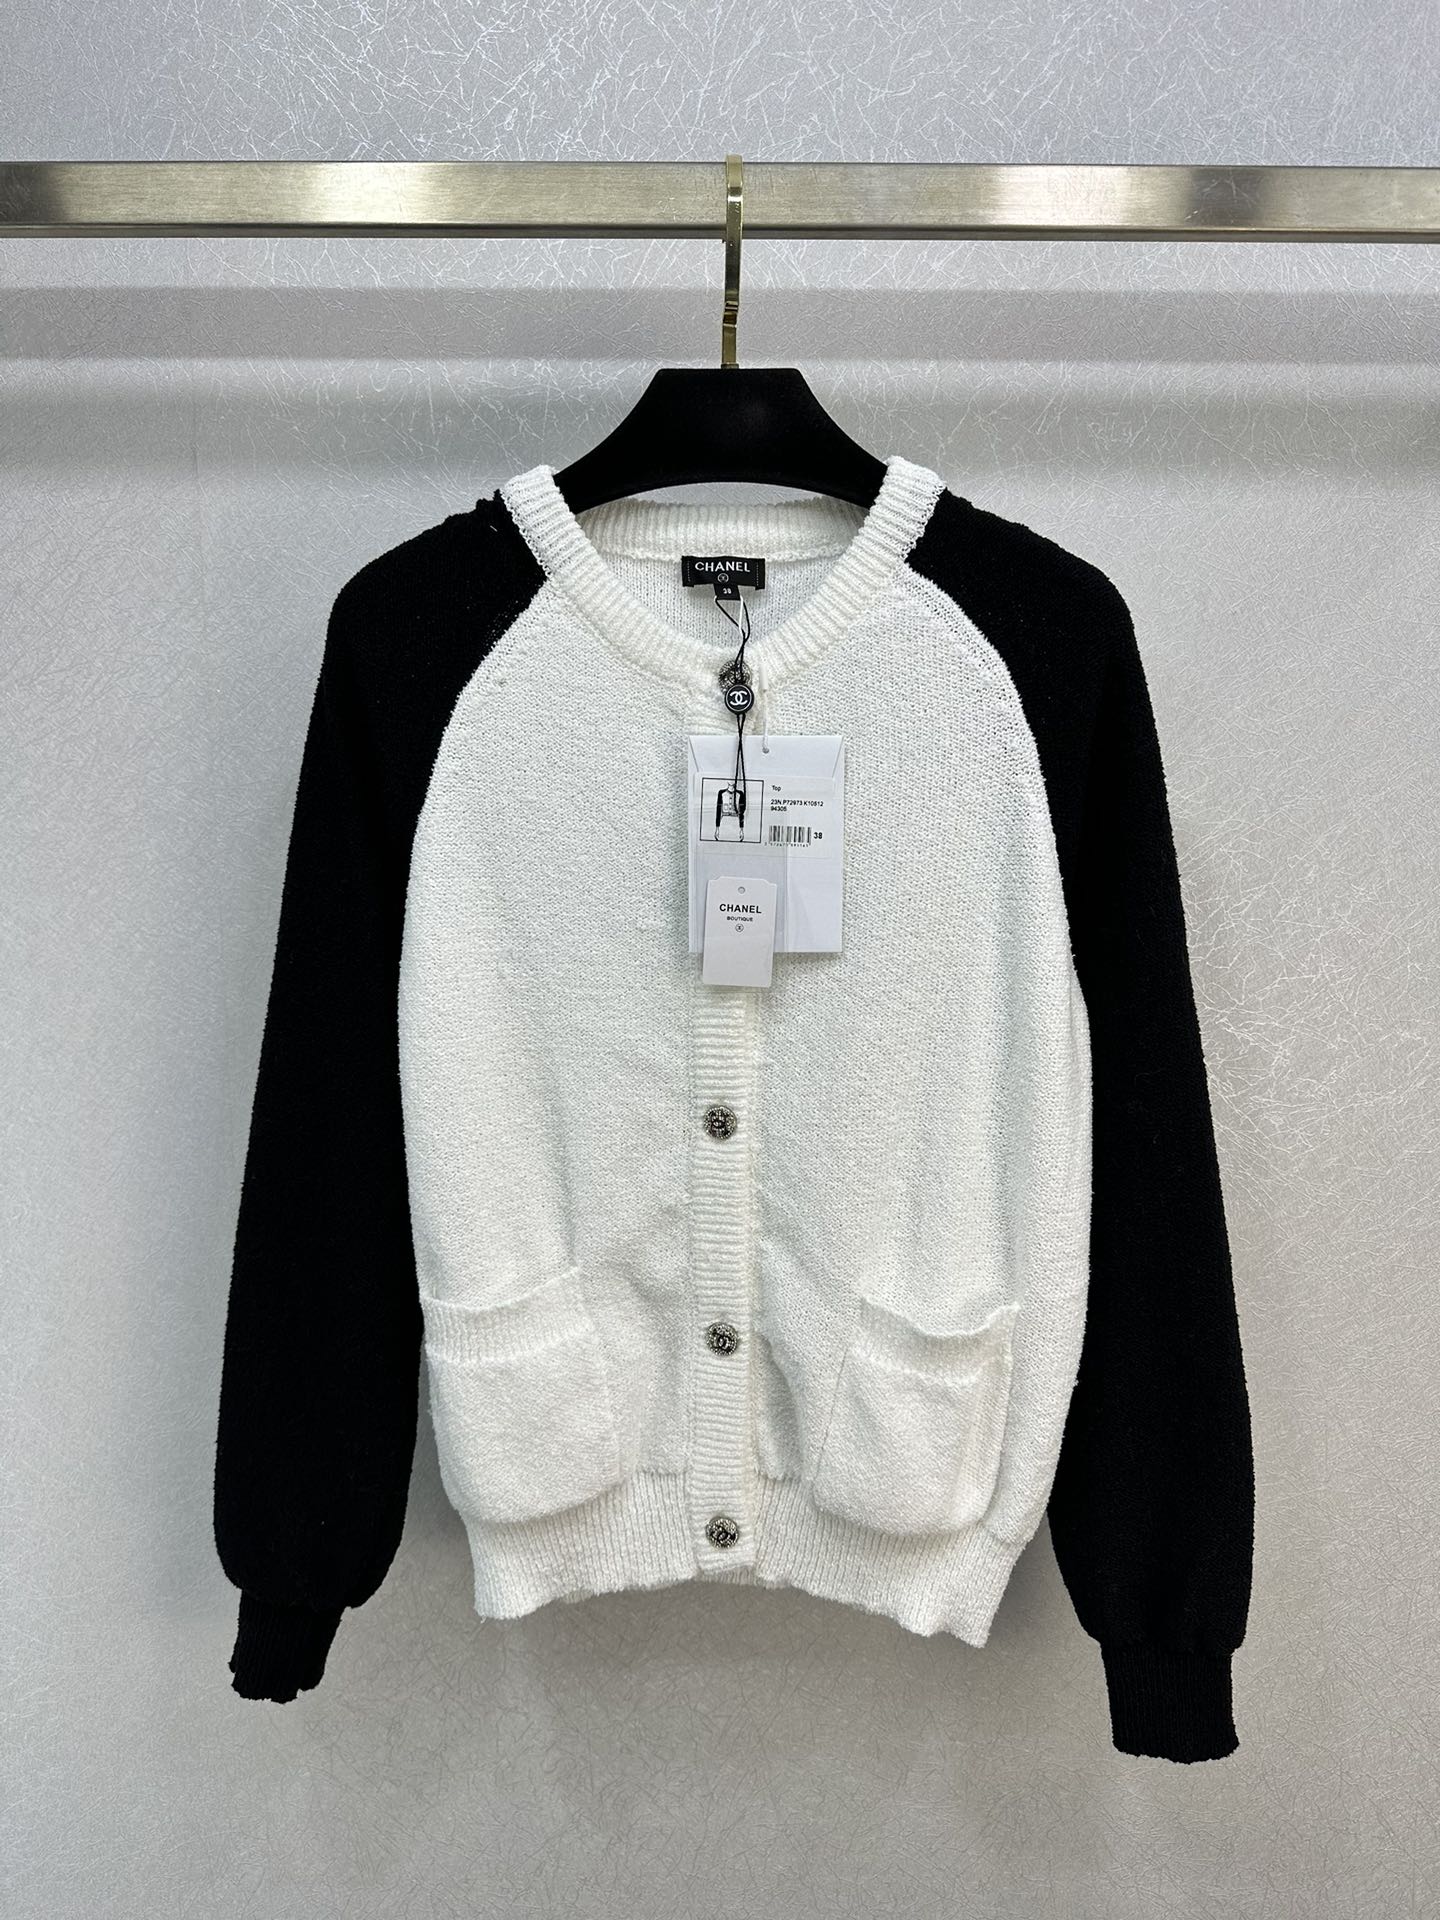 Replica Every Designer
 Chanel Clothing Knit Sweater Sweatshirts Knitting Fall/Winter Collection